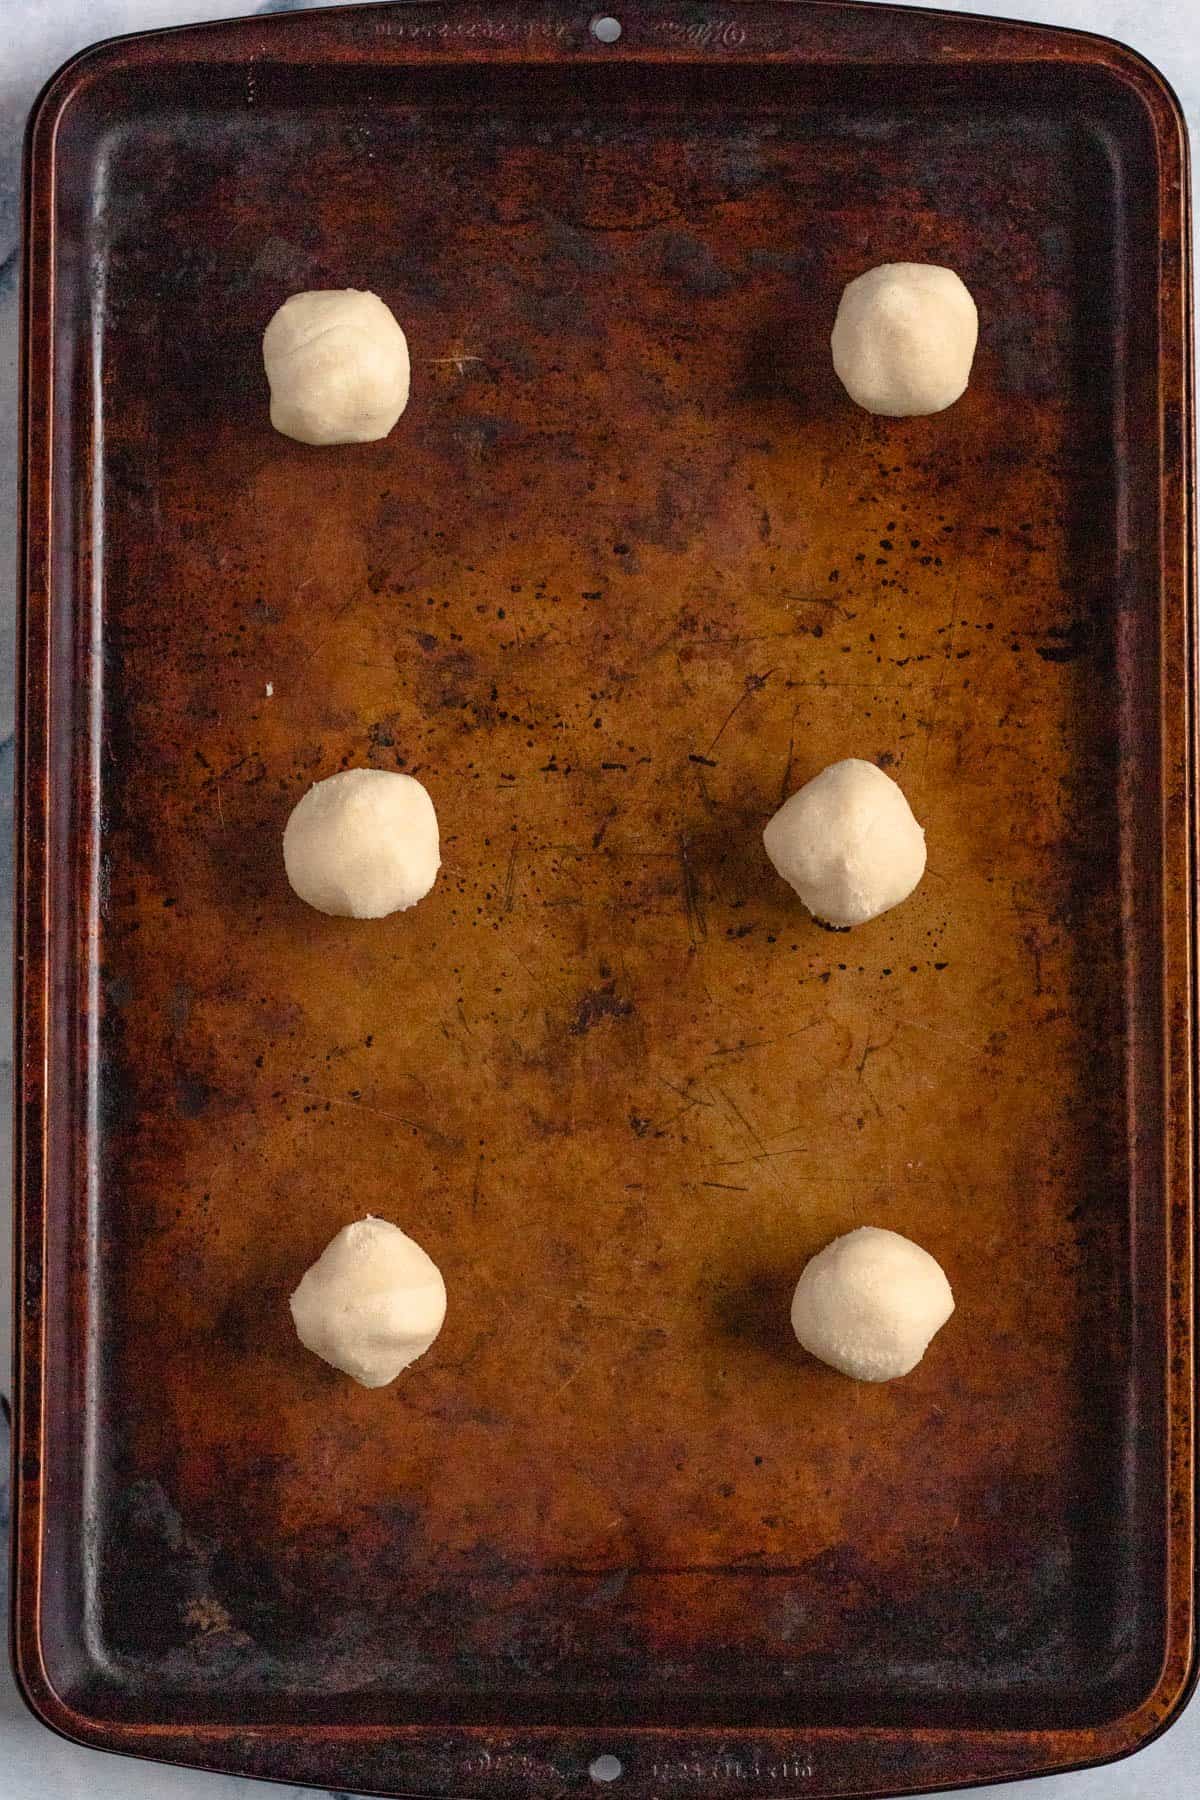 Sugar cookie dough rolled into balls and placed on a baking tray. 